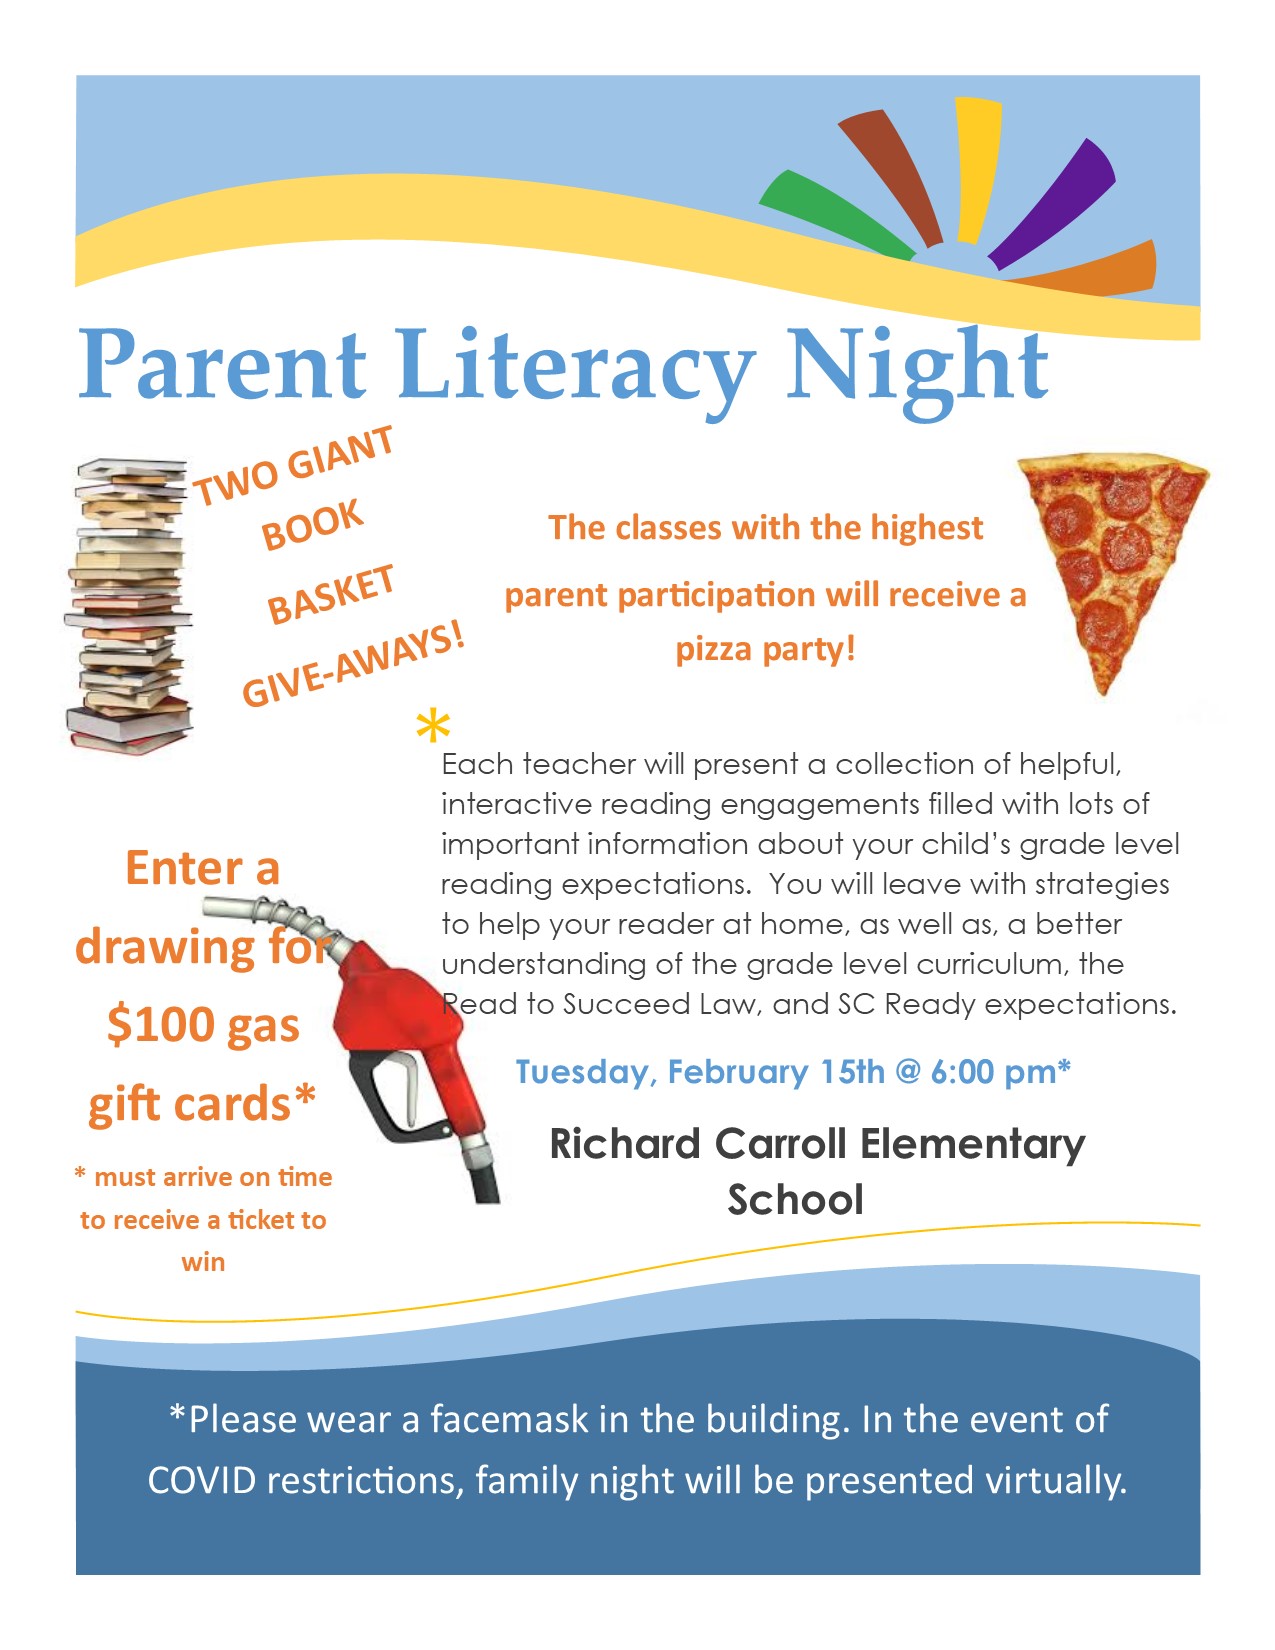 Parent Literacy Night Tuesday, February 15th @ 6:00 pm*